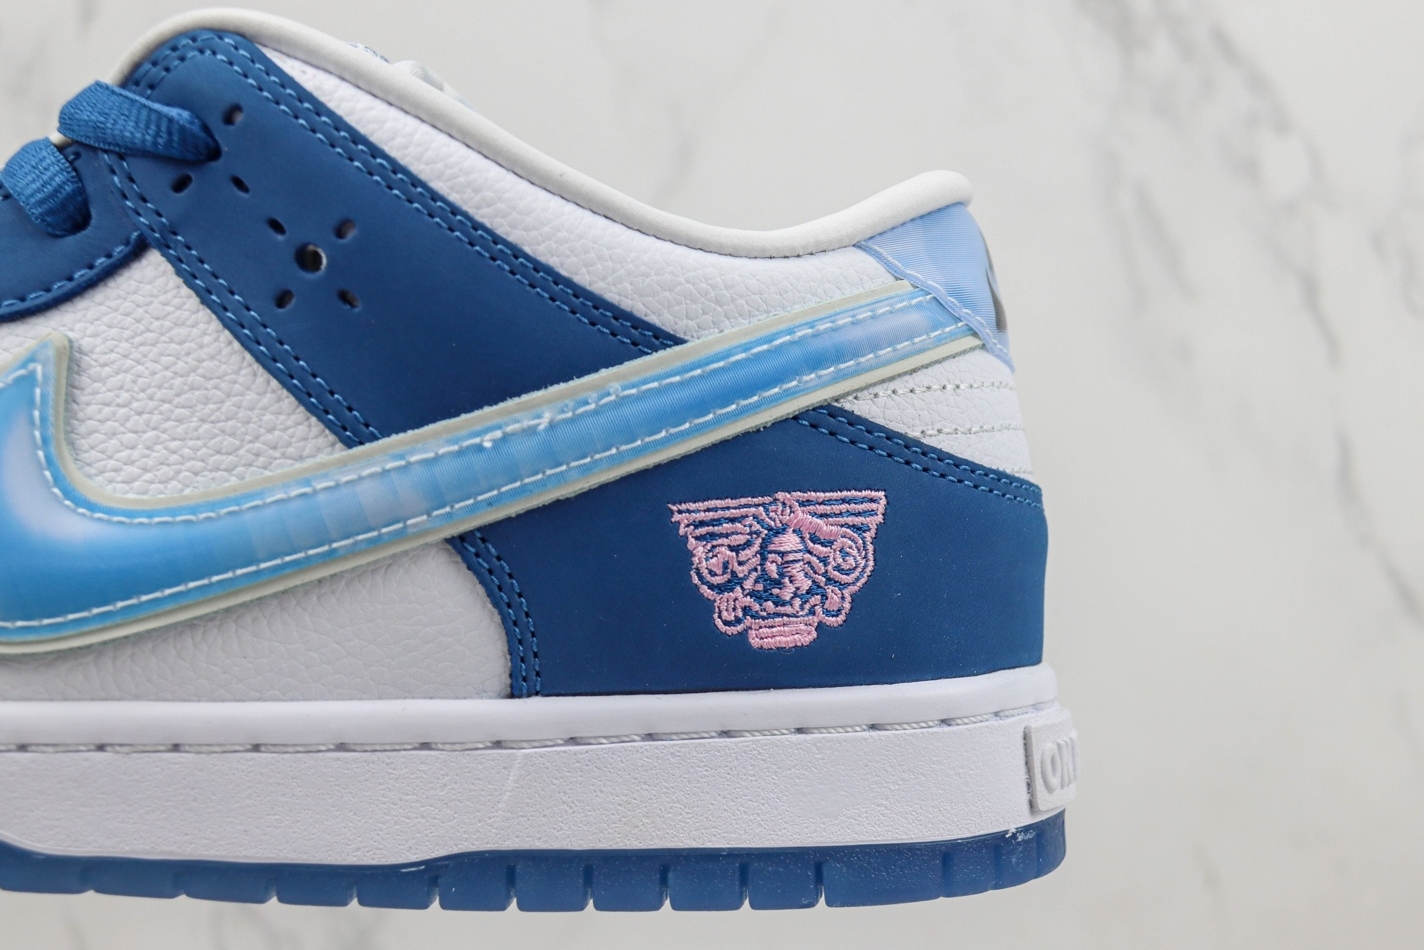 Nike SB Dunk Low 'Born x Raised One Block At A Time' FN7819-400 - Exclusive Street-Style Sneaker